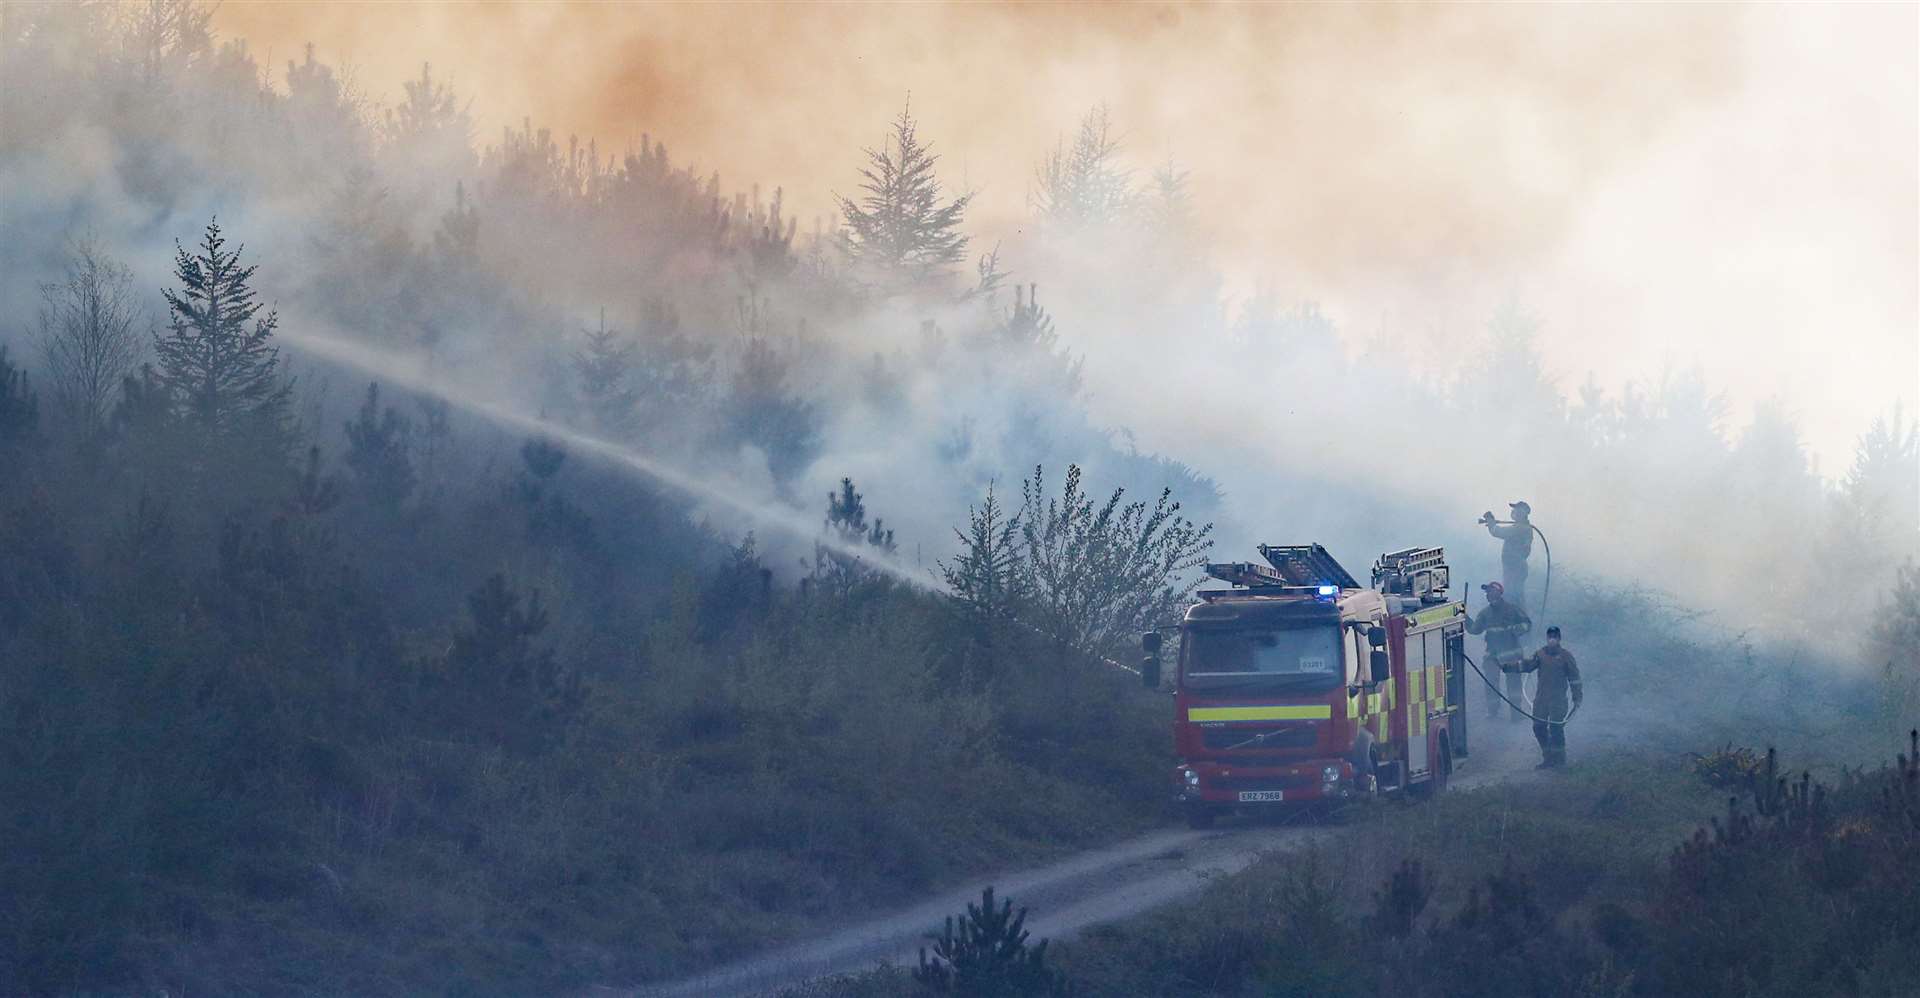 Firefighters tackle a gorse fire in Newry in April (Niall Carson/PA)